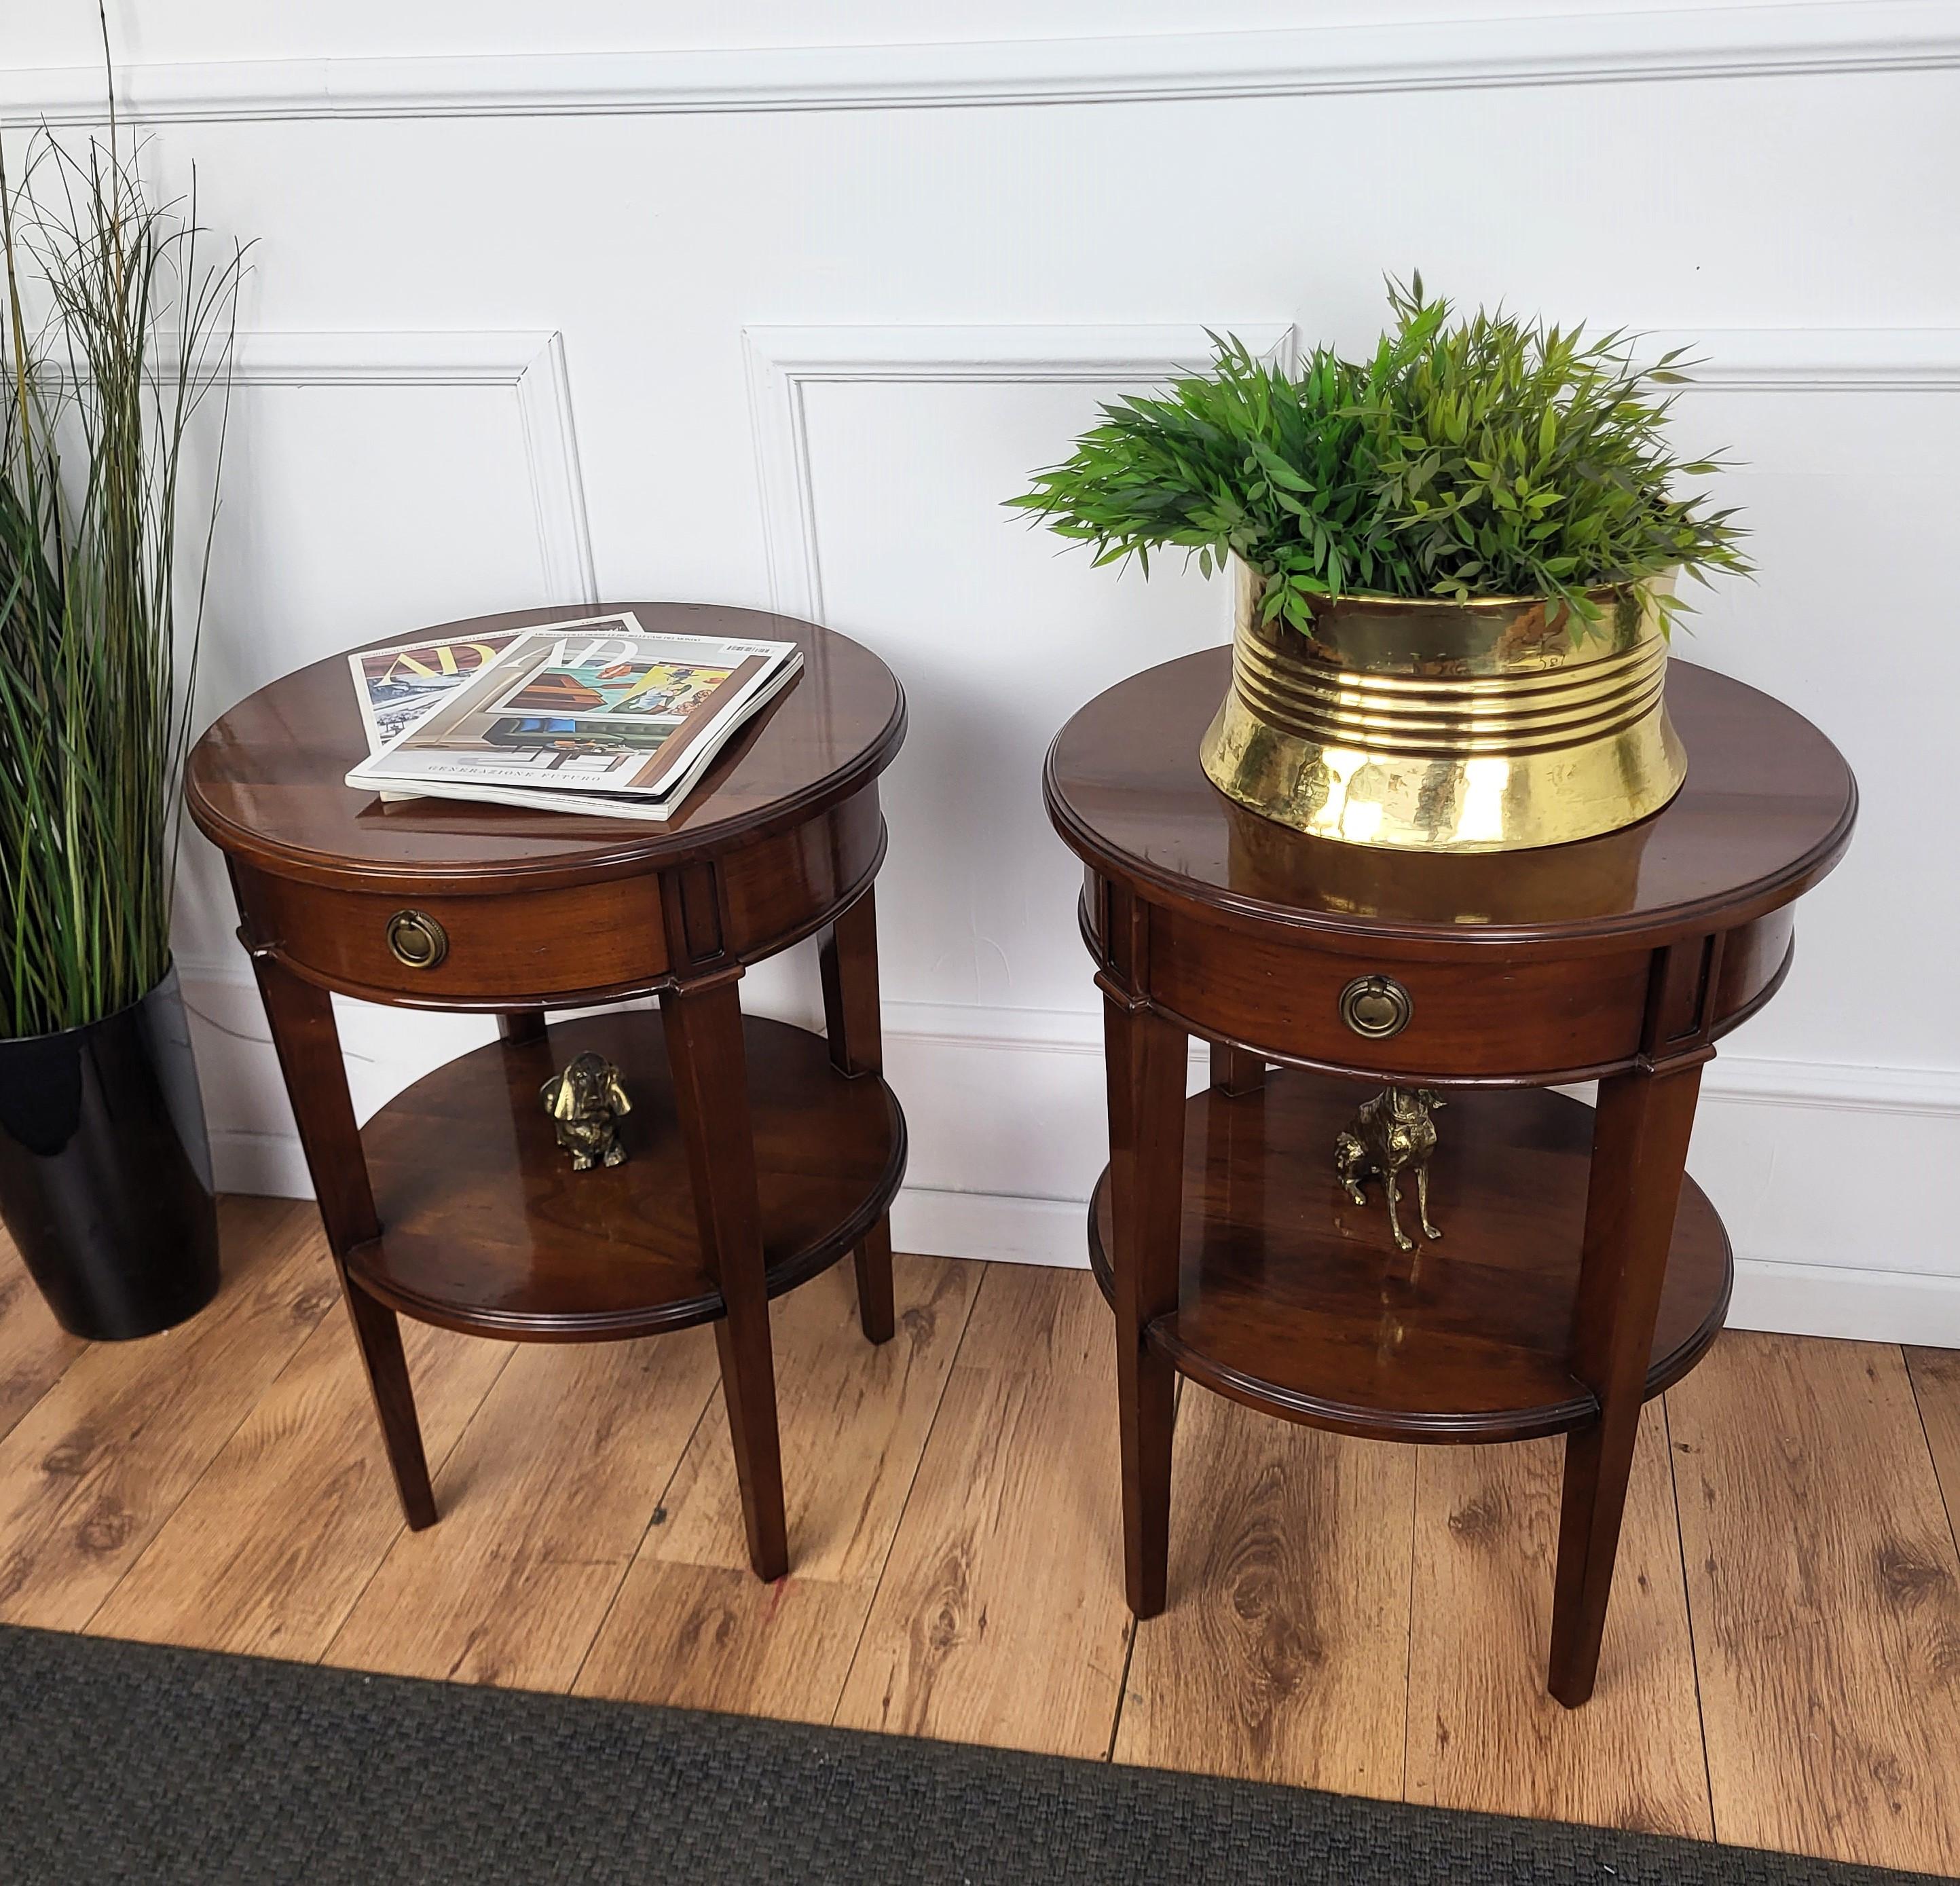 Very elegant and refined pair of Italian 1940s Art Deco sofa side tables with great round design shape and beautiful color of walnut wood, central drawer and brass handles. This pair makes a great look in any style living room, as a complementary